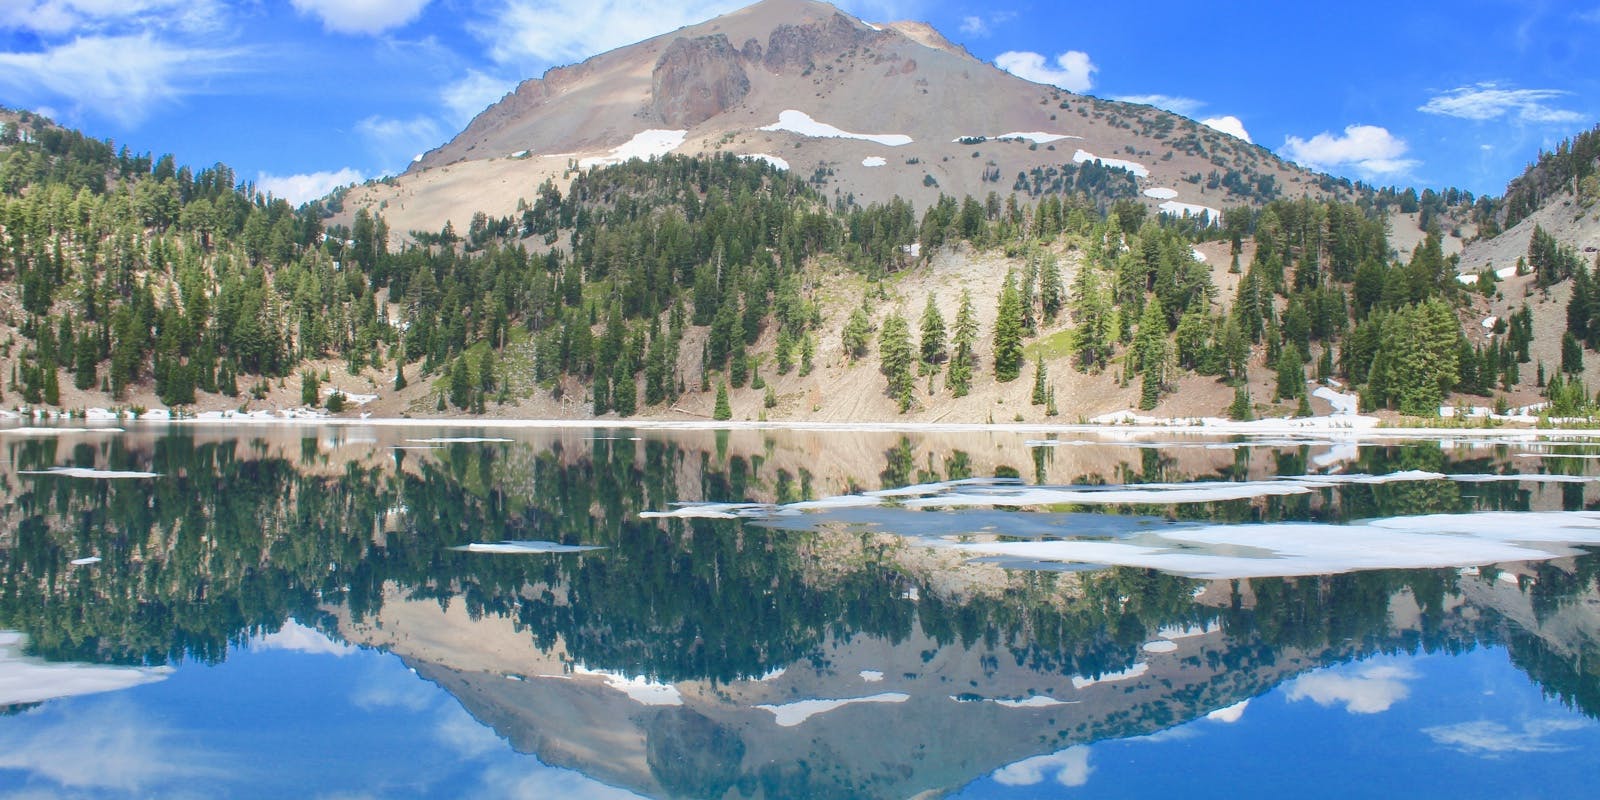 Lassen Volcanic National Park by Anna French (@spintheglobeproject)